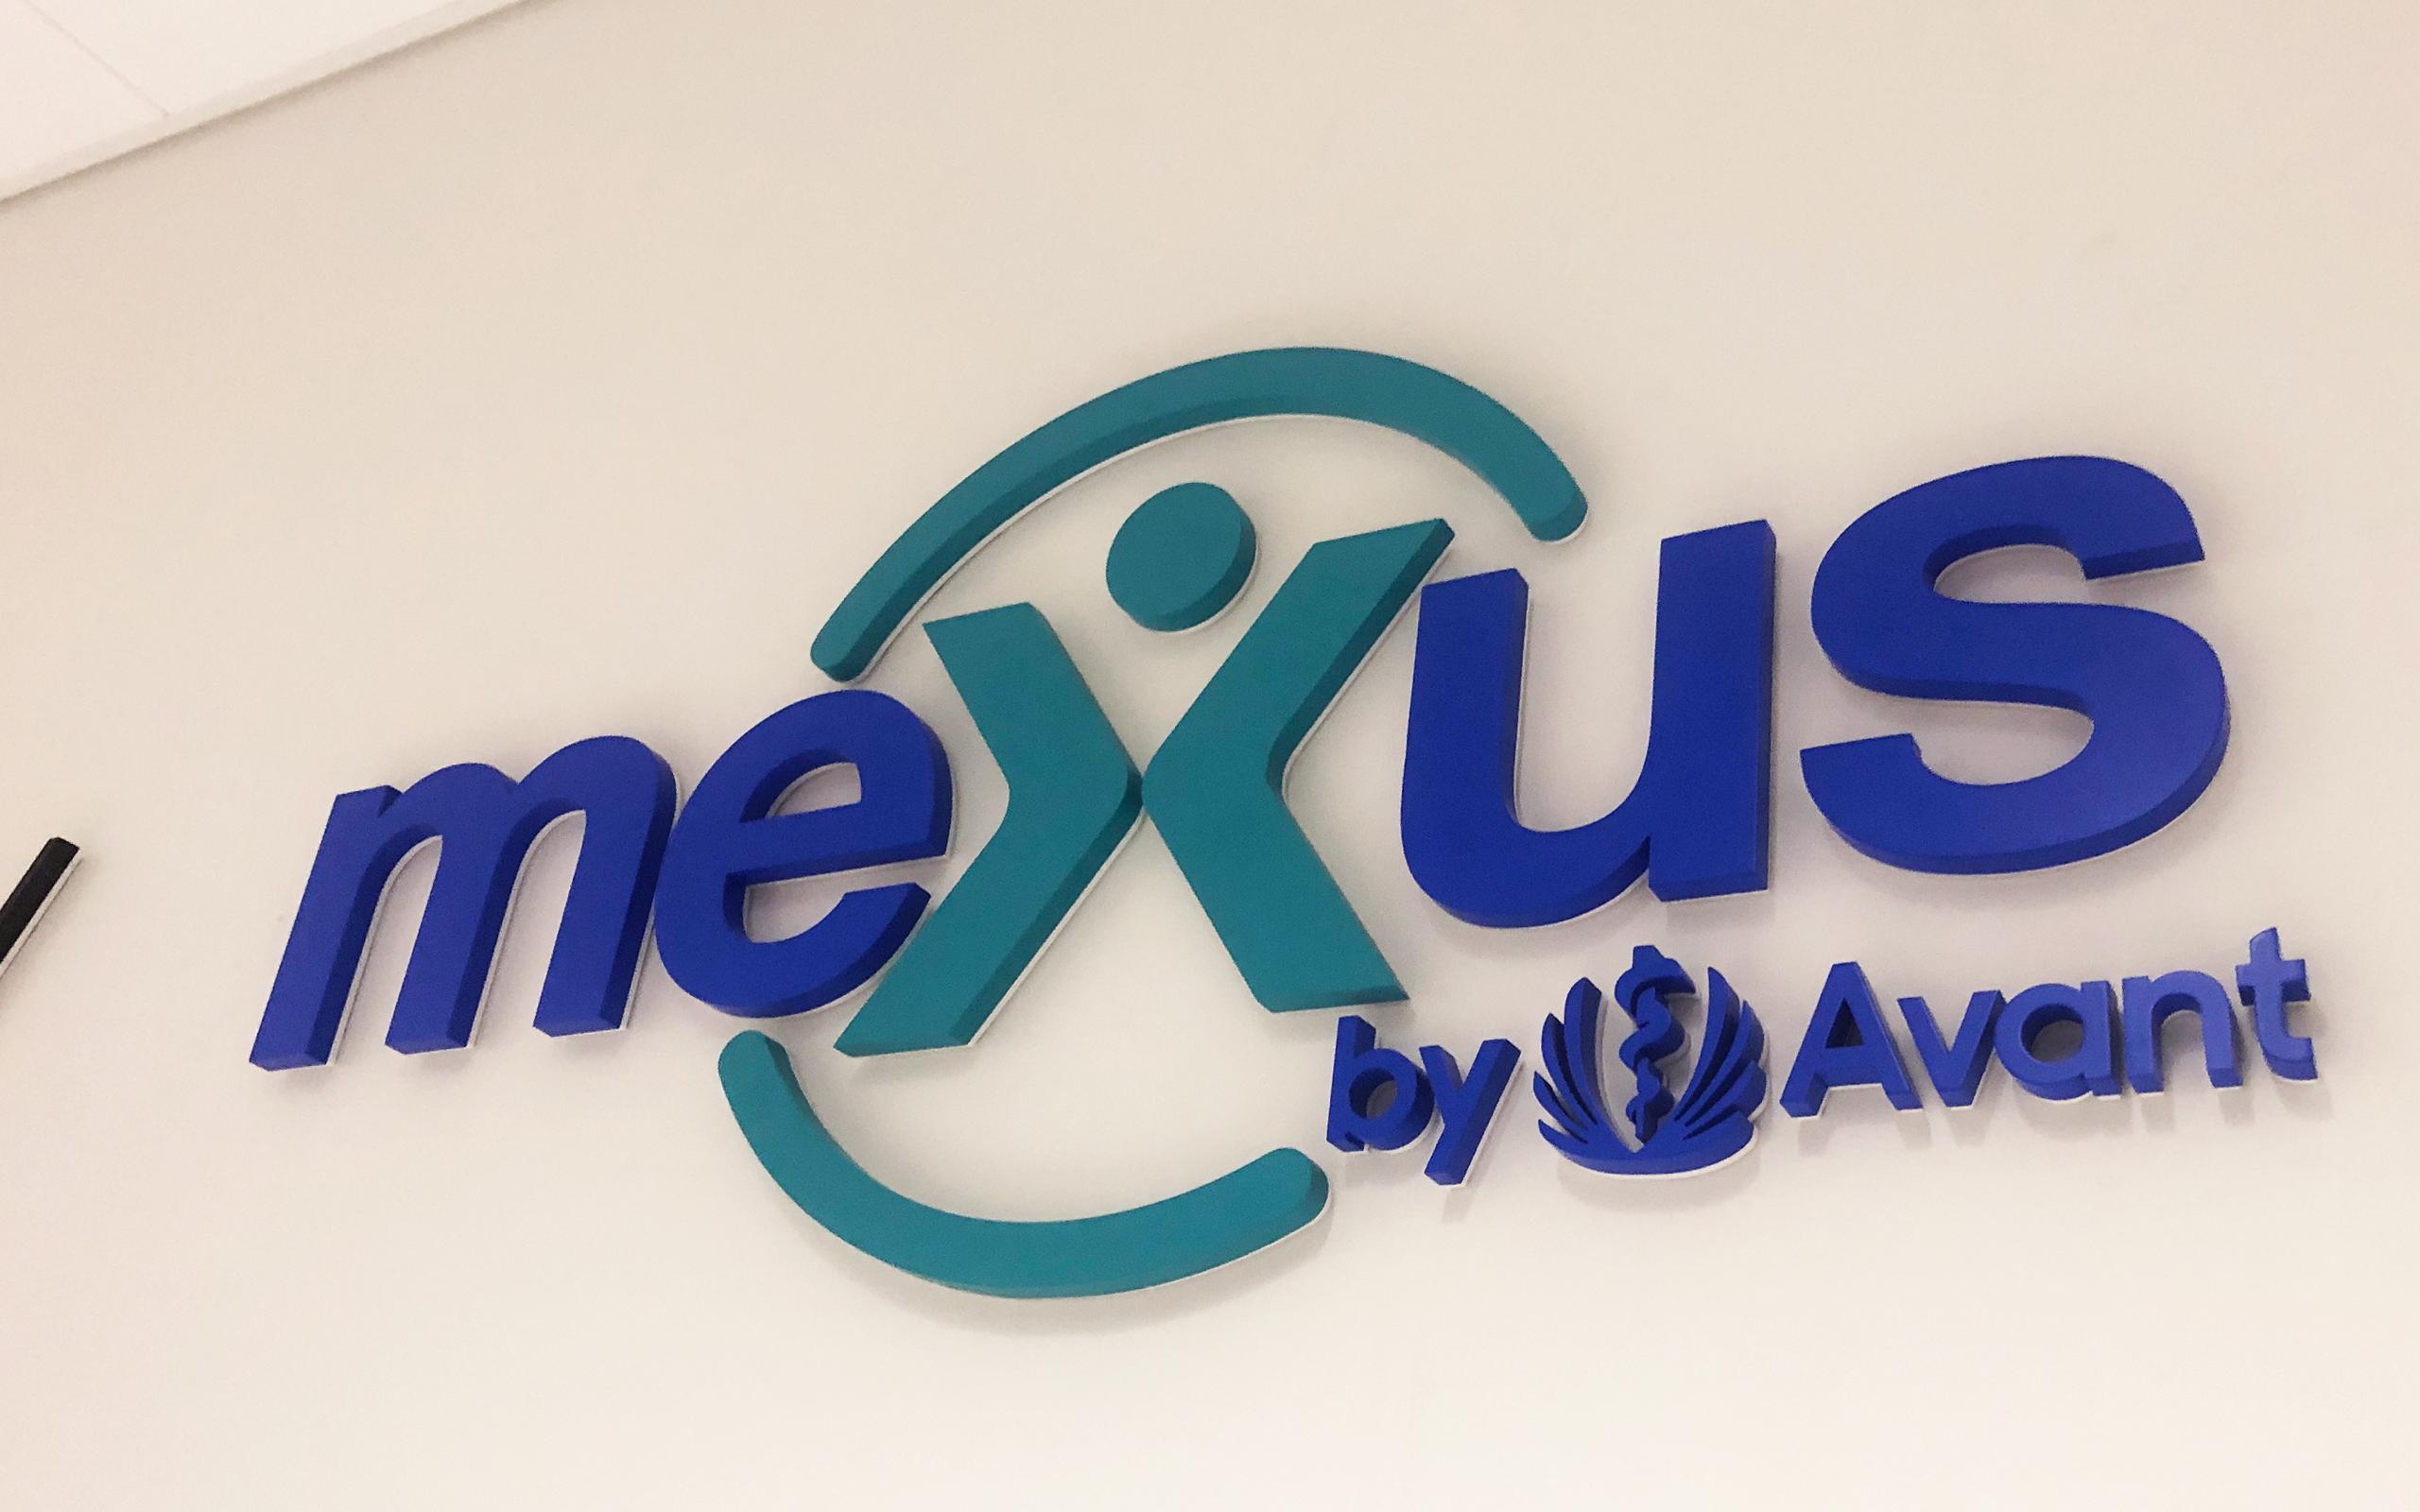 Mexus Office Sign 3d Lettering casting a shadow